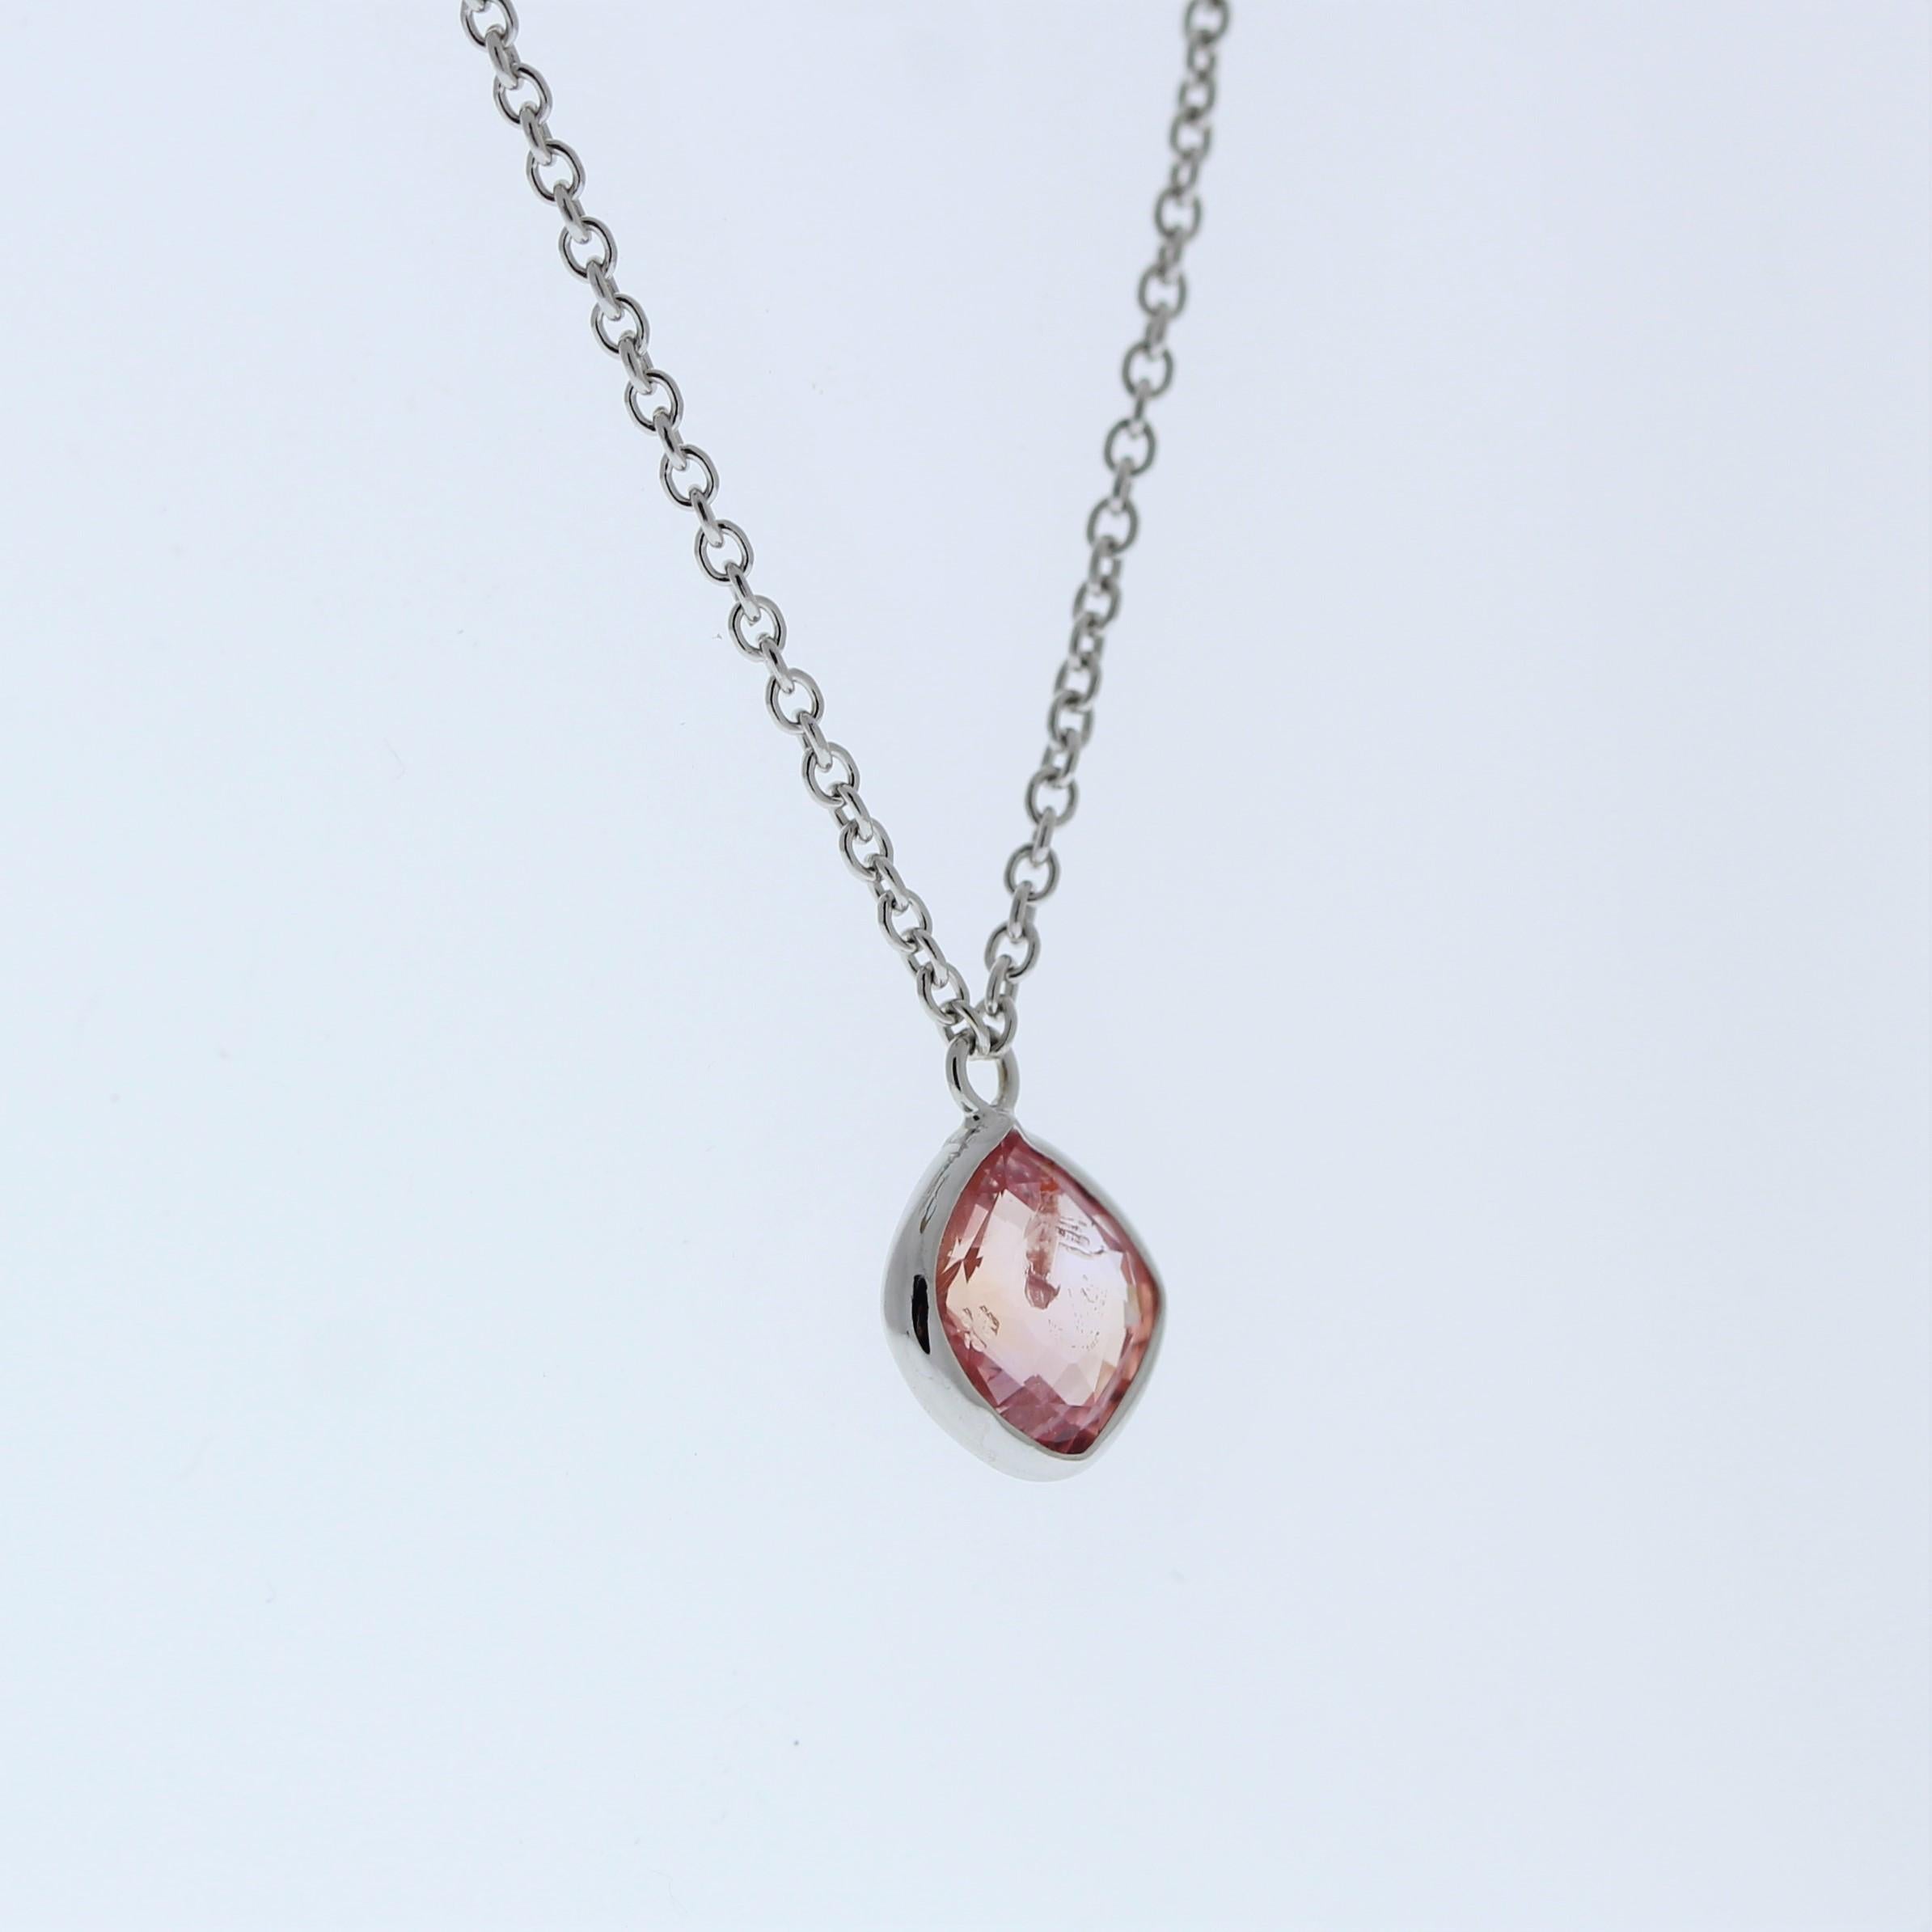 The necklace features a 1.39-carat cushion-cut padparadscha sapphire set in a 14 karat white gold pendant or setting. The cushion cut and the distinctive pink-orange color of the padparadscha sapphire against the white gold setting are likely to